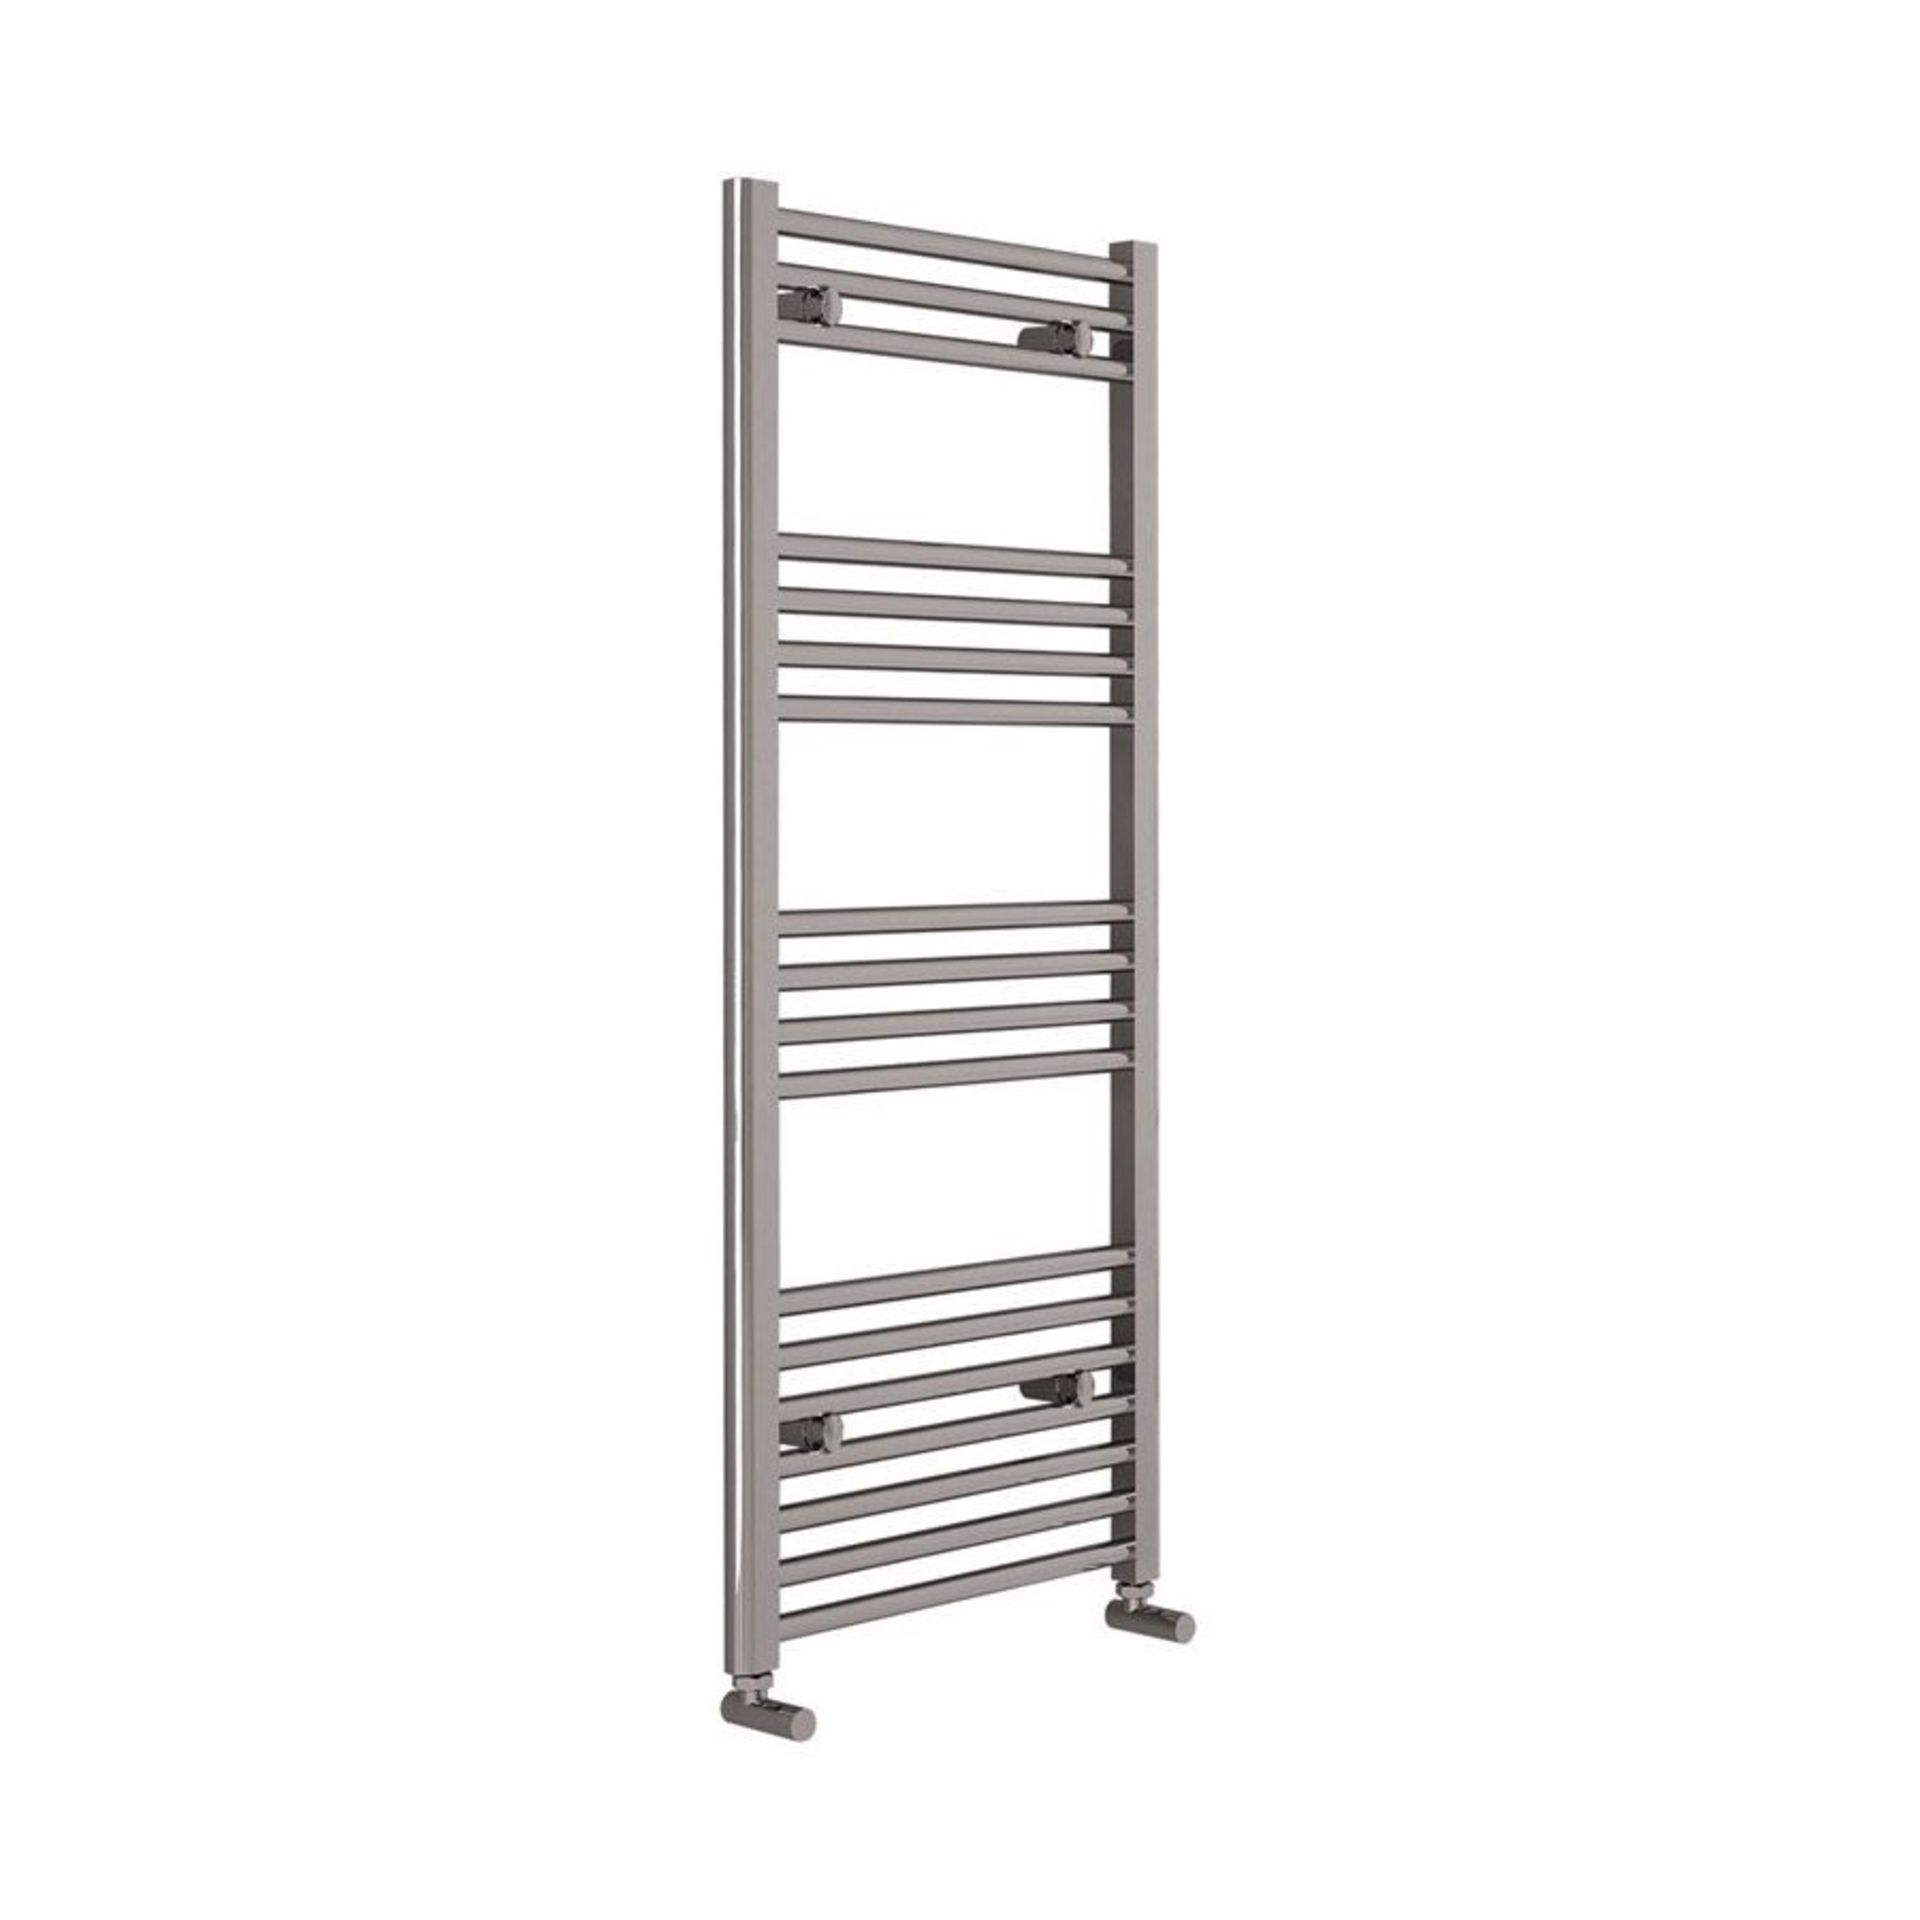 Carisa Nile chrome towel radiator, 1600x500mm, looks to still be factory dsealed although that is